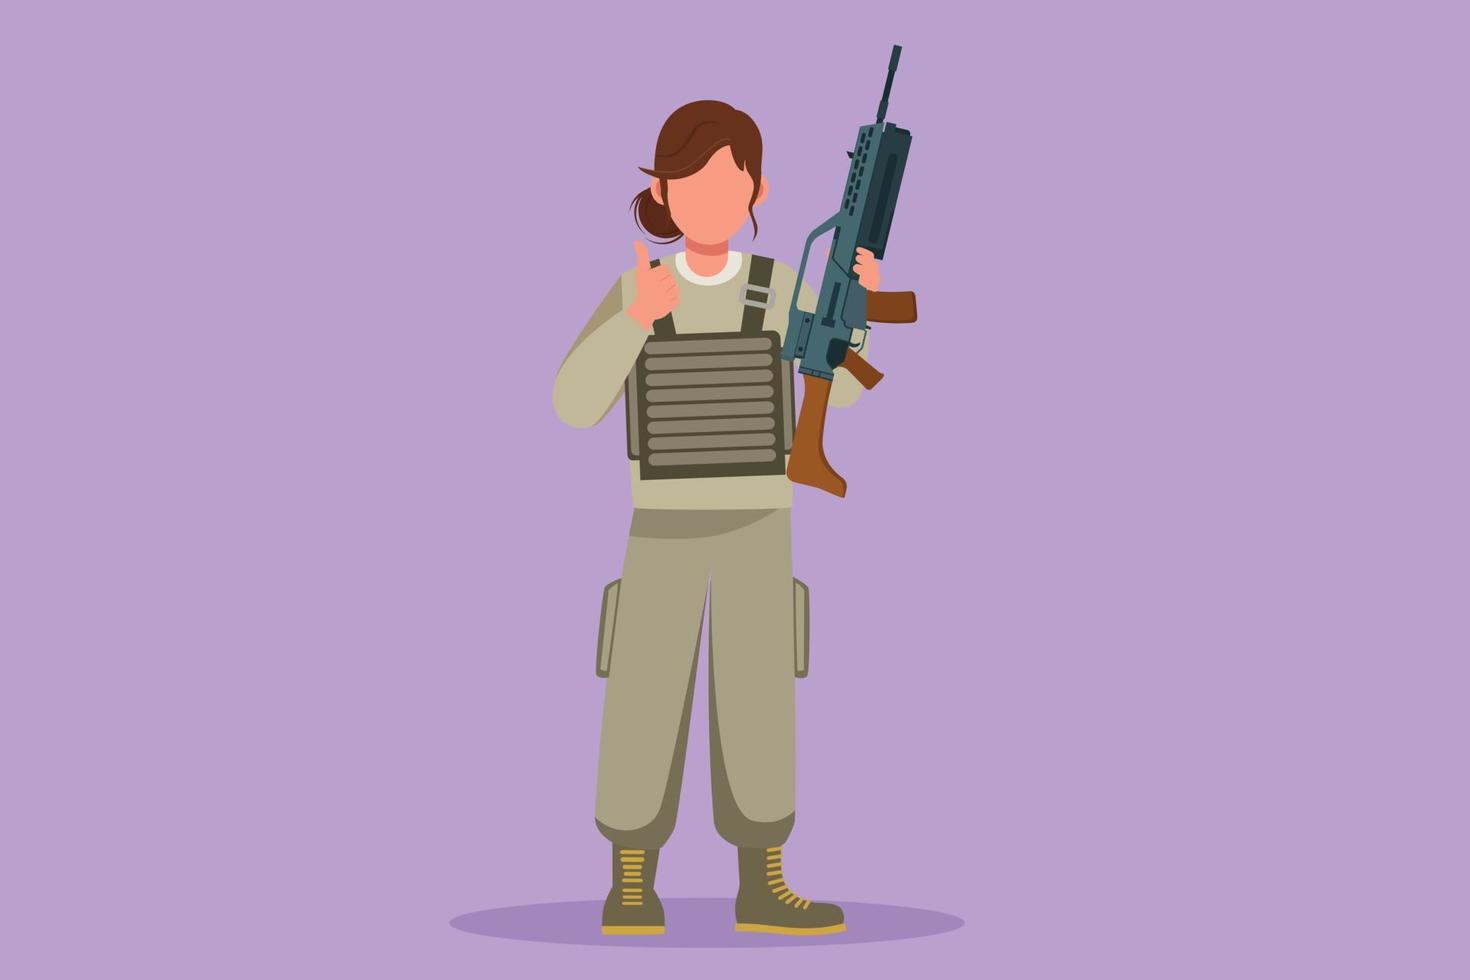 Cartoon flat style drawing female soldiers or army standing with weapons, full uniforms, and thumbs up gestures serving the country with strength of military forces. Graphic design vector illustration